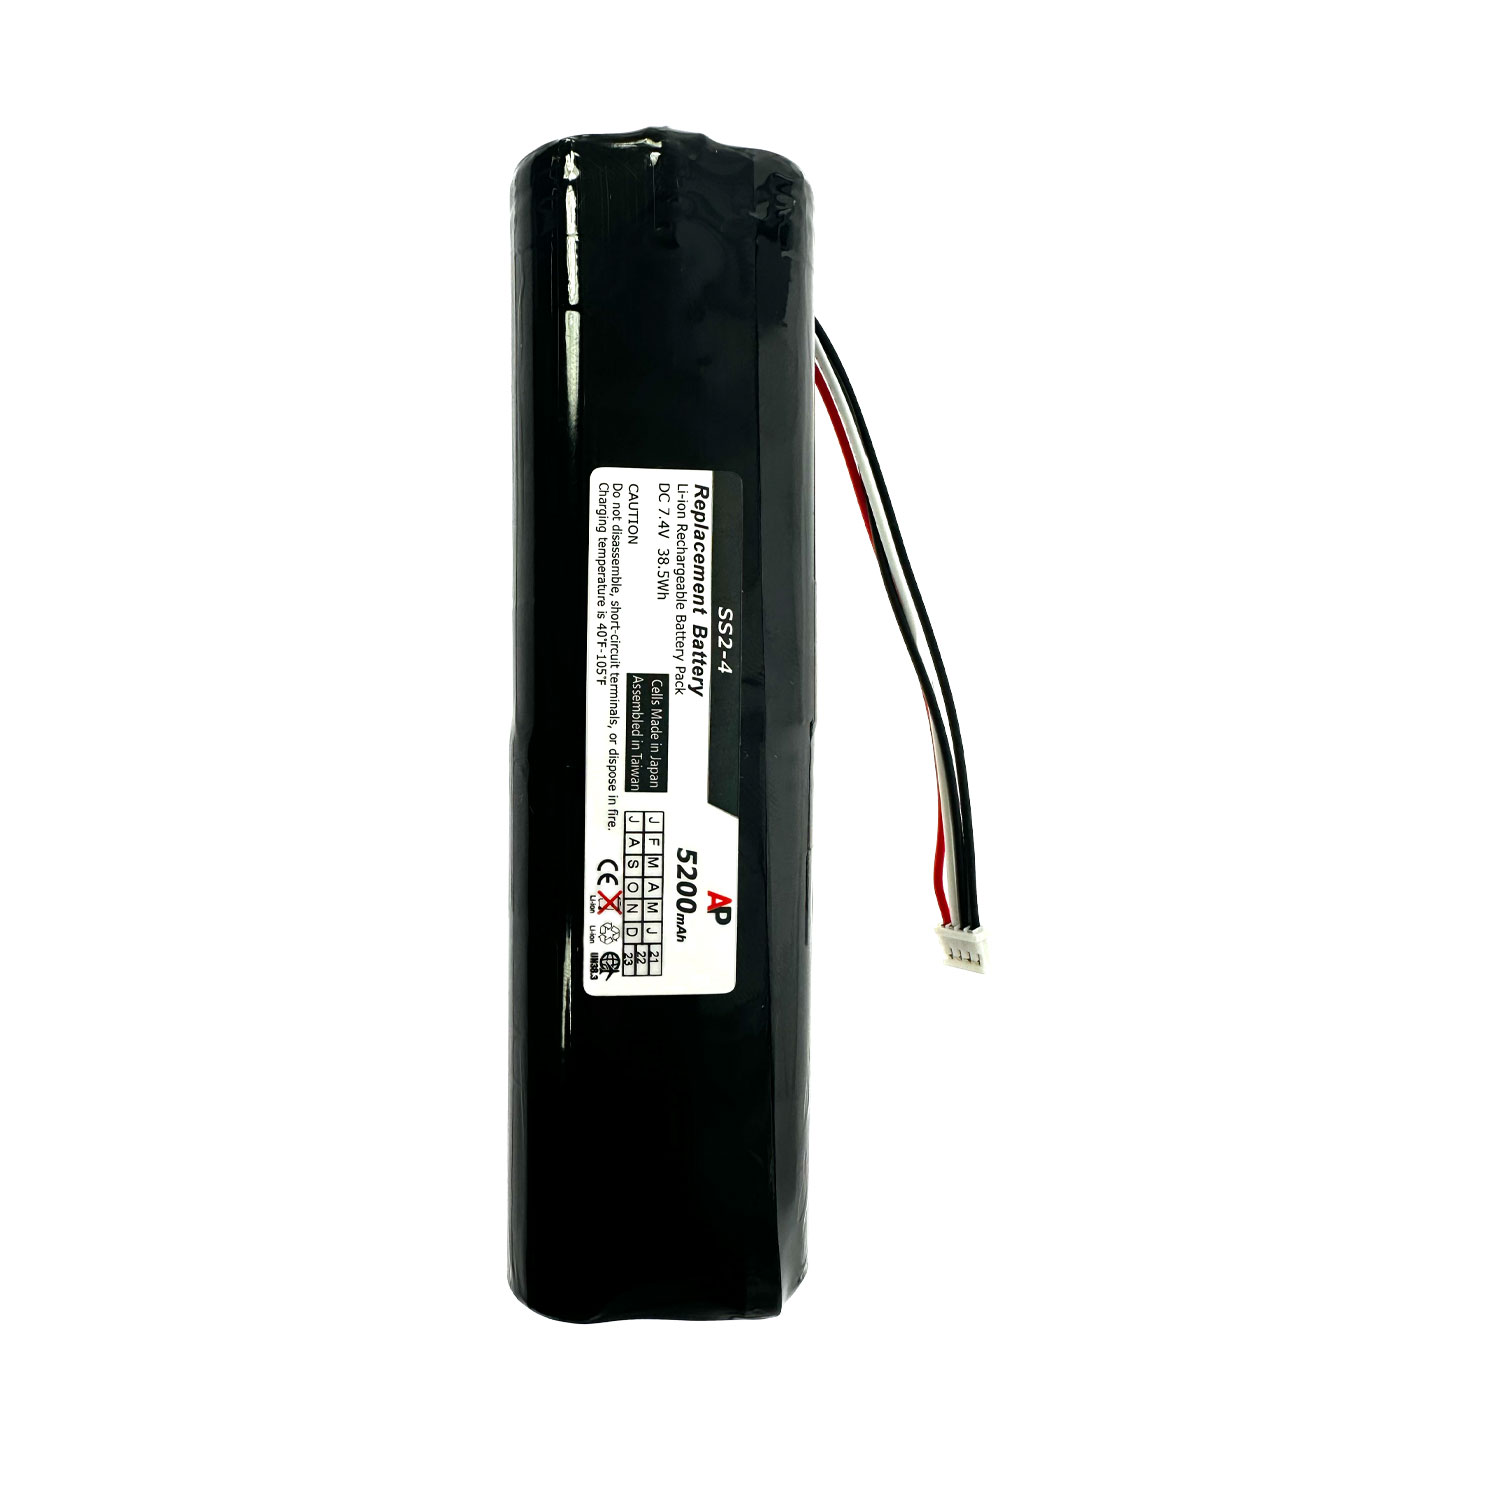 Replacement Battery for Polycom SoundStation 2 and 2W.  Extended Capacity. - image 2 of 4